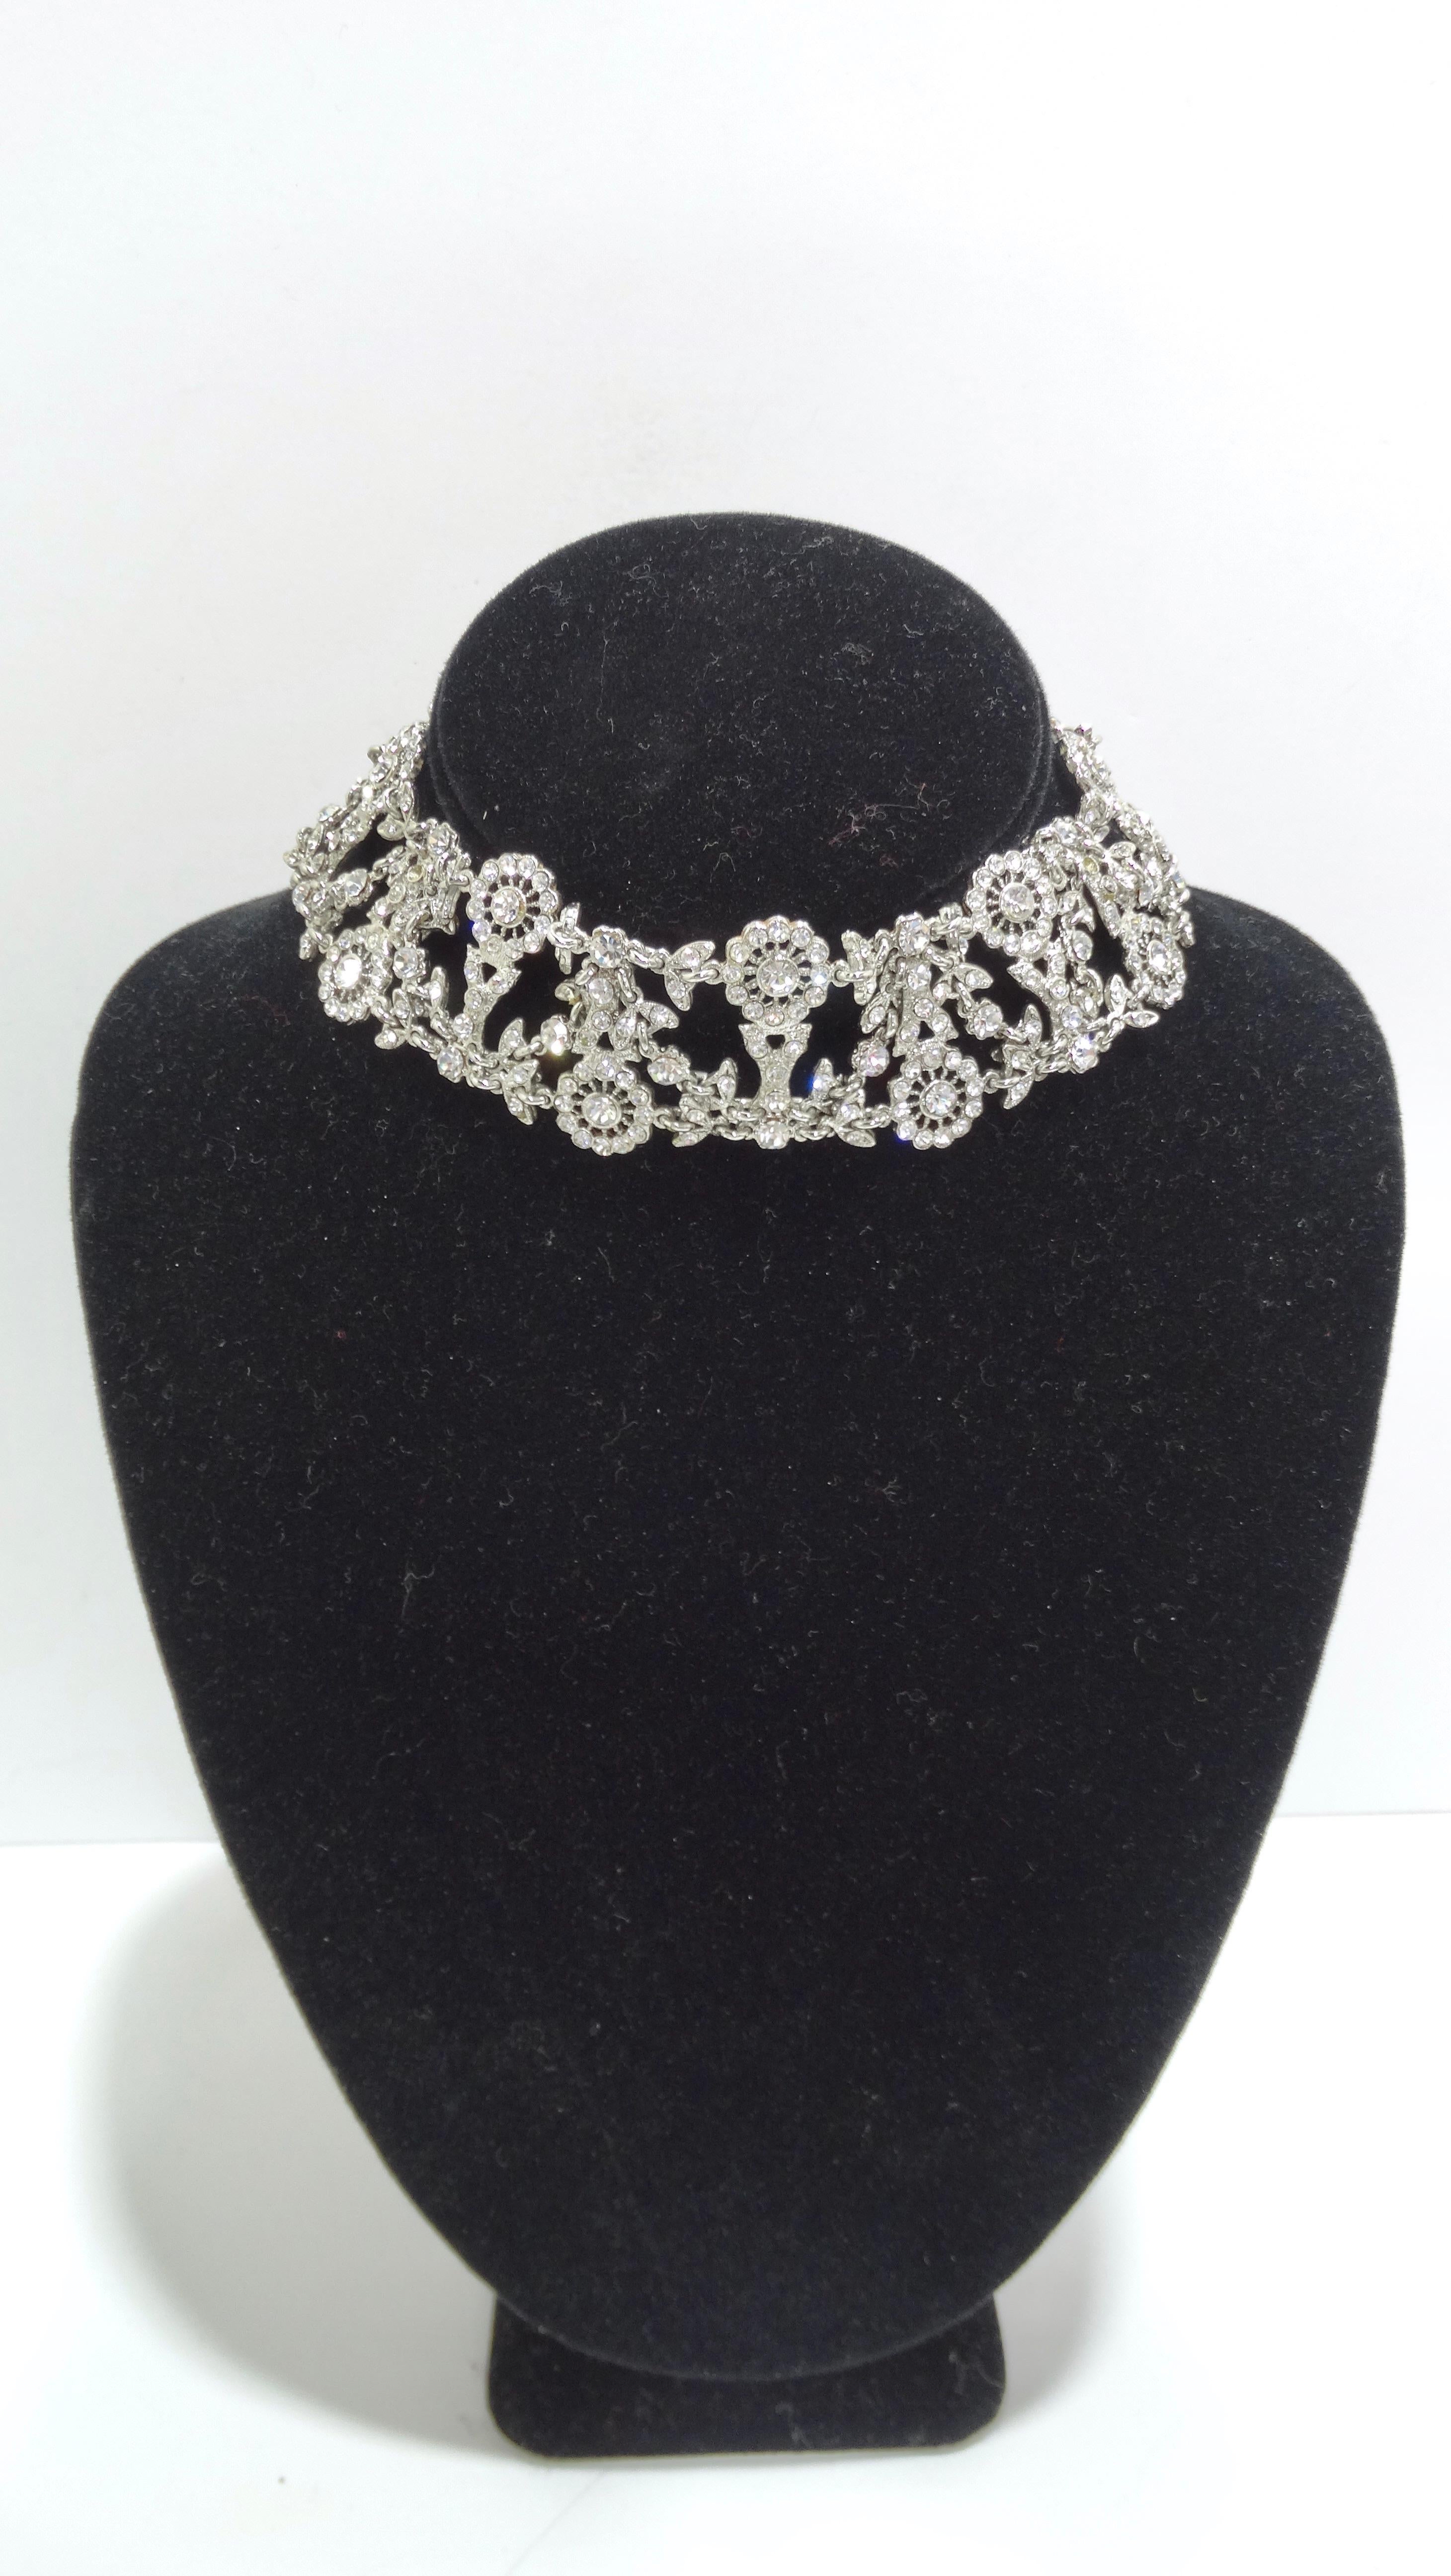 Feel your most glamorous and feminine self in this 1970's sterling silver choker. The whole necklace is beautifully bejewelled in addition to flower detailing. The length is slightly adjustable. A couple jewels have fallen out. When thinking about